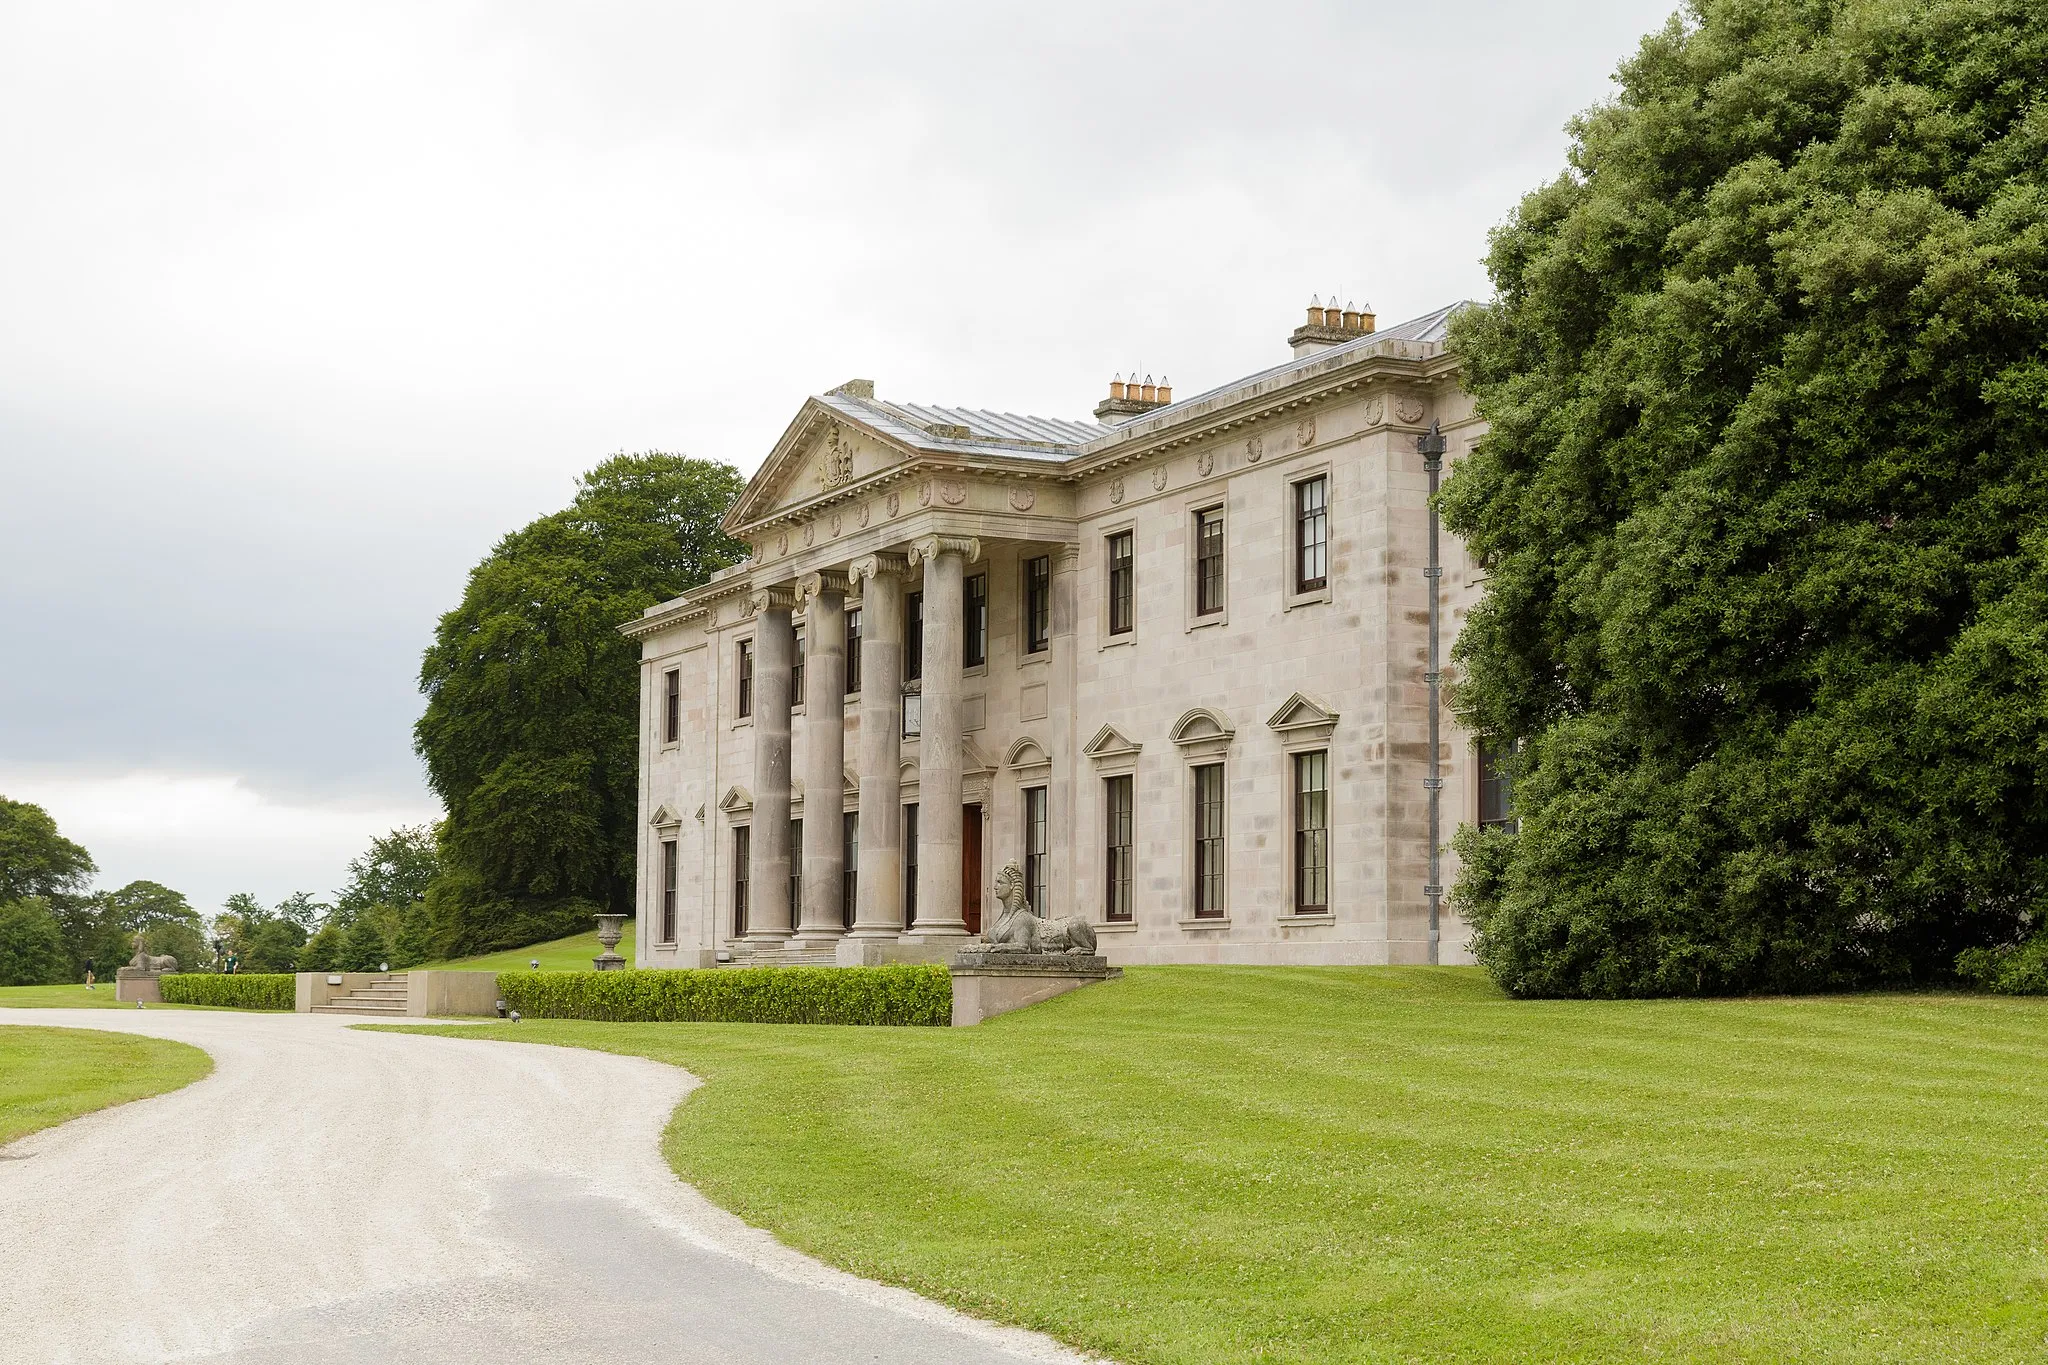 Photo showing: The house of Ballyfin Demesne in Ballyfin, Ireland, built in the 1820s by Sir Charles Coote, 9th Baronet